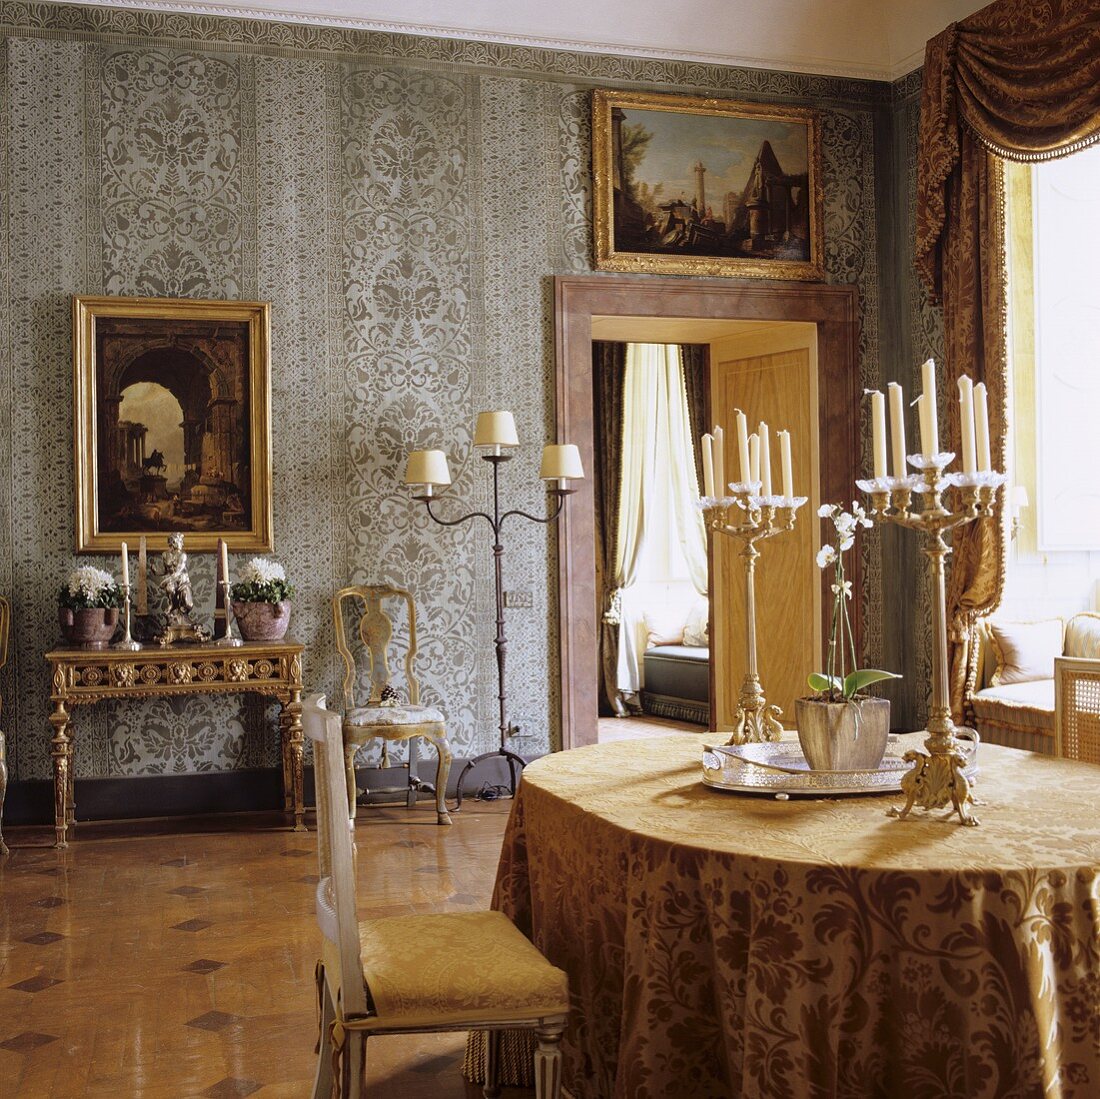 A dining room in a palazzo with Rococo furniture and an antique candlestick on the table